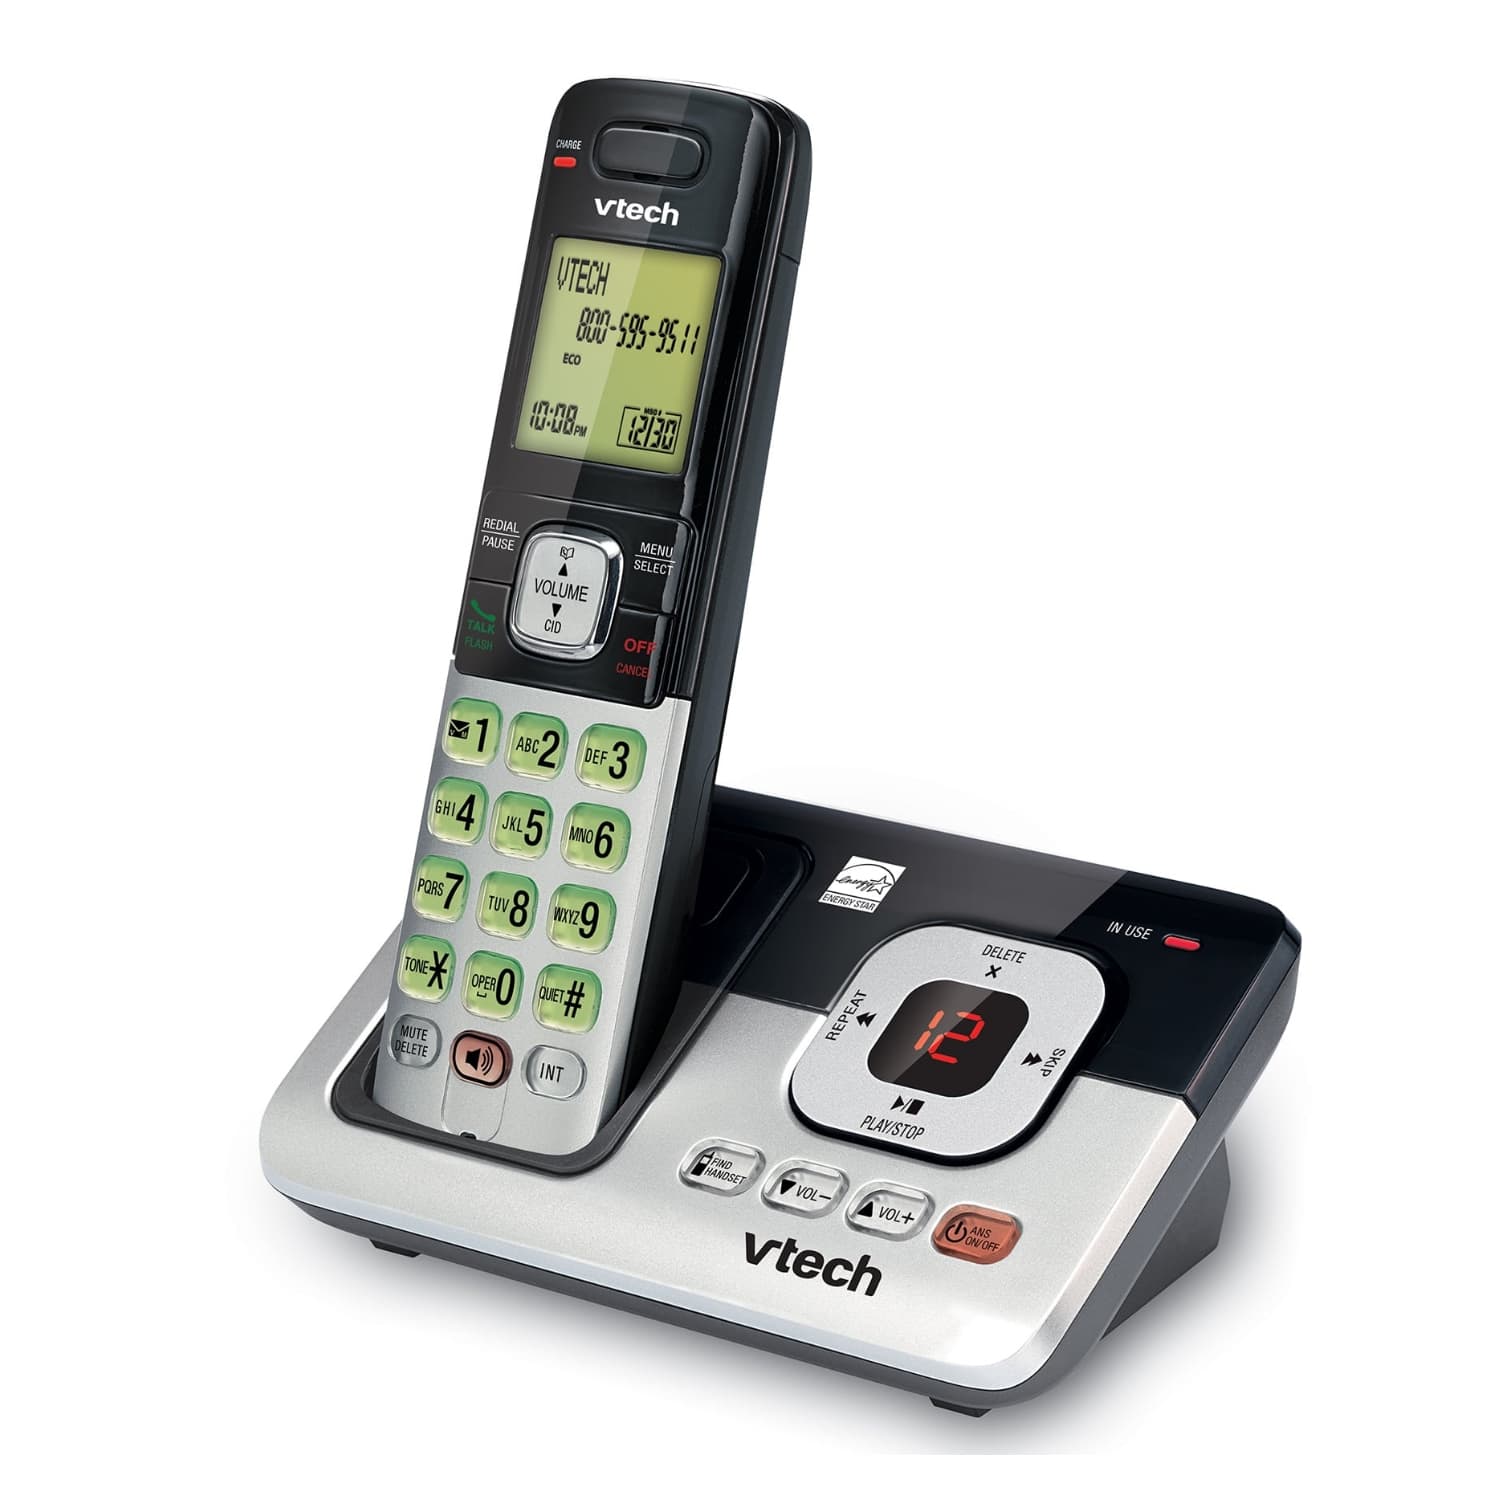 Backlit Display VTech CS6829 Expandable Cordless Answering System with Caller ID DECT 6.0